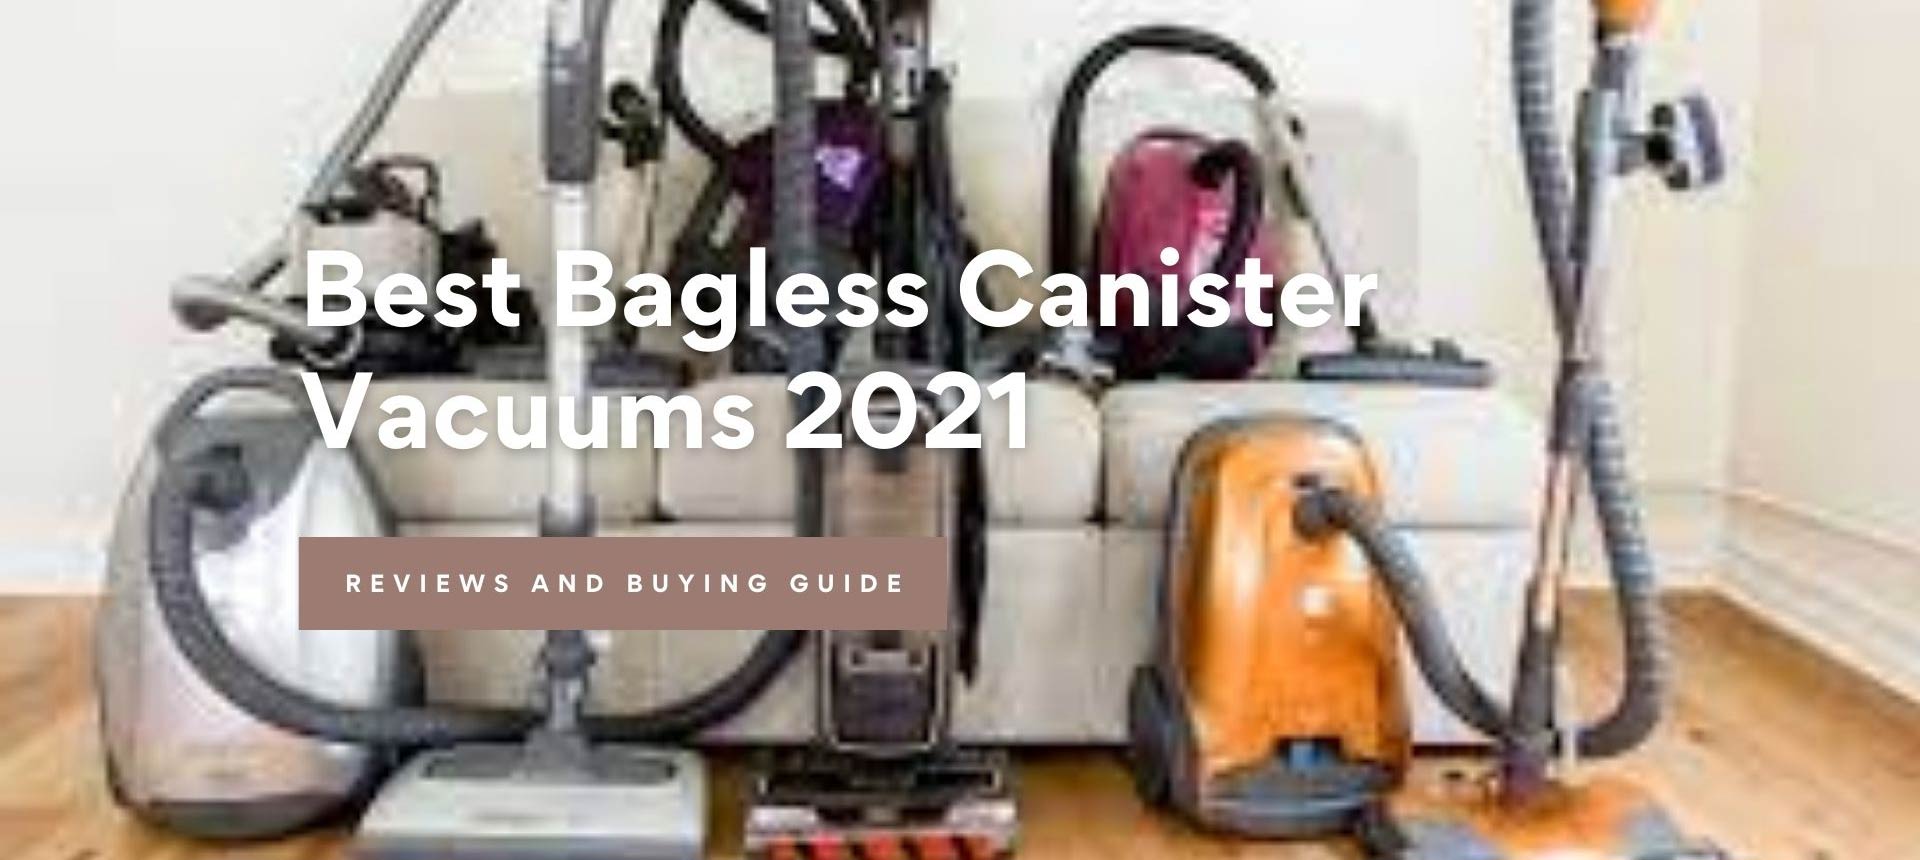 Best Bagless Canister Vacuums 2021